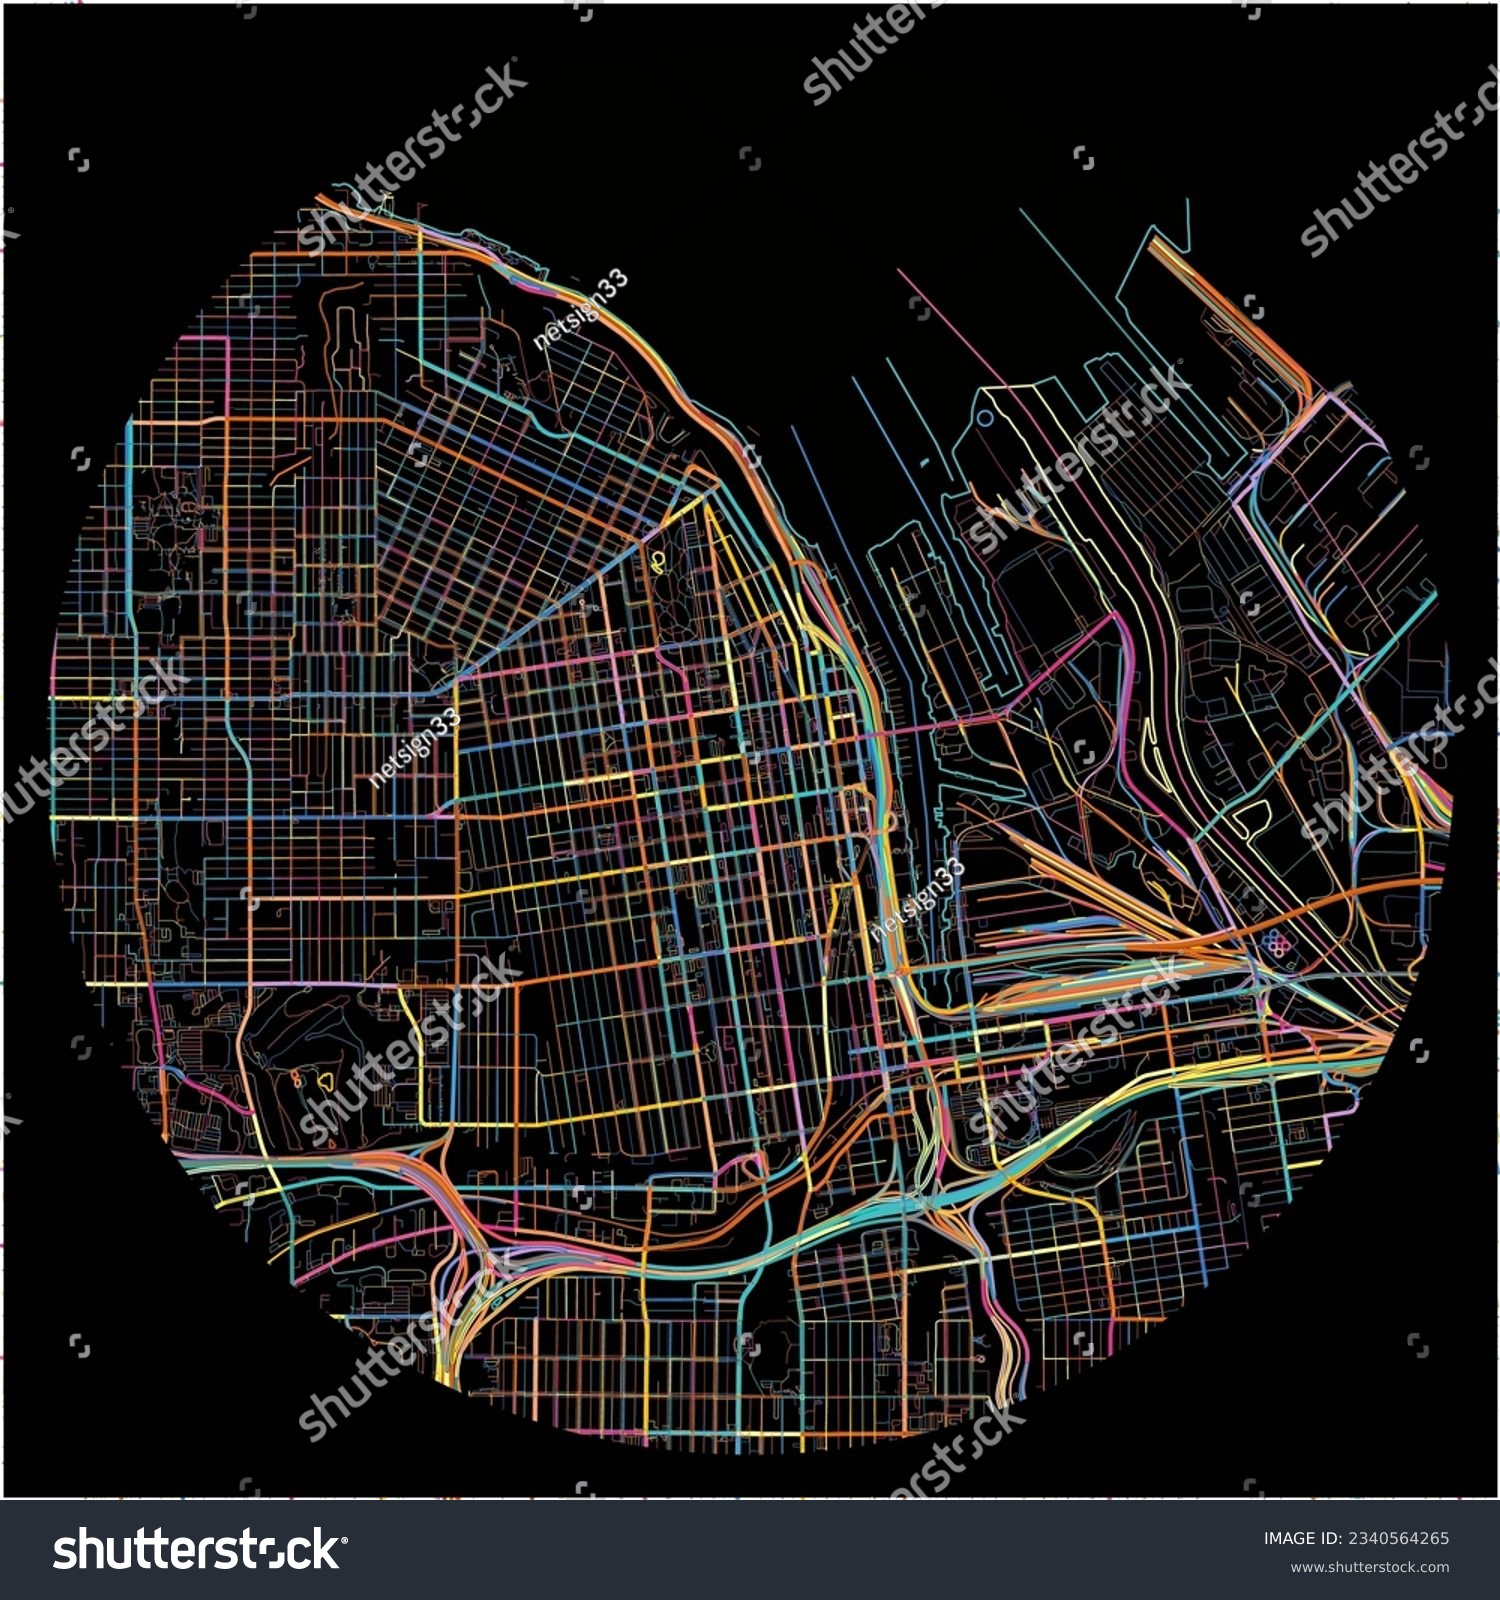 SVG of Map of Tacoma, Washington with all major and minor roads, railways and waterways. Colorful line art on black background. svg